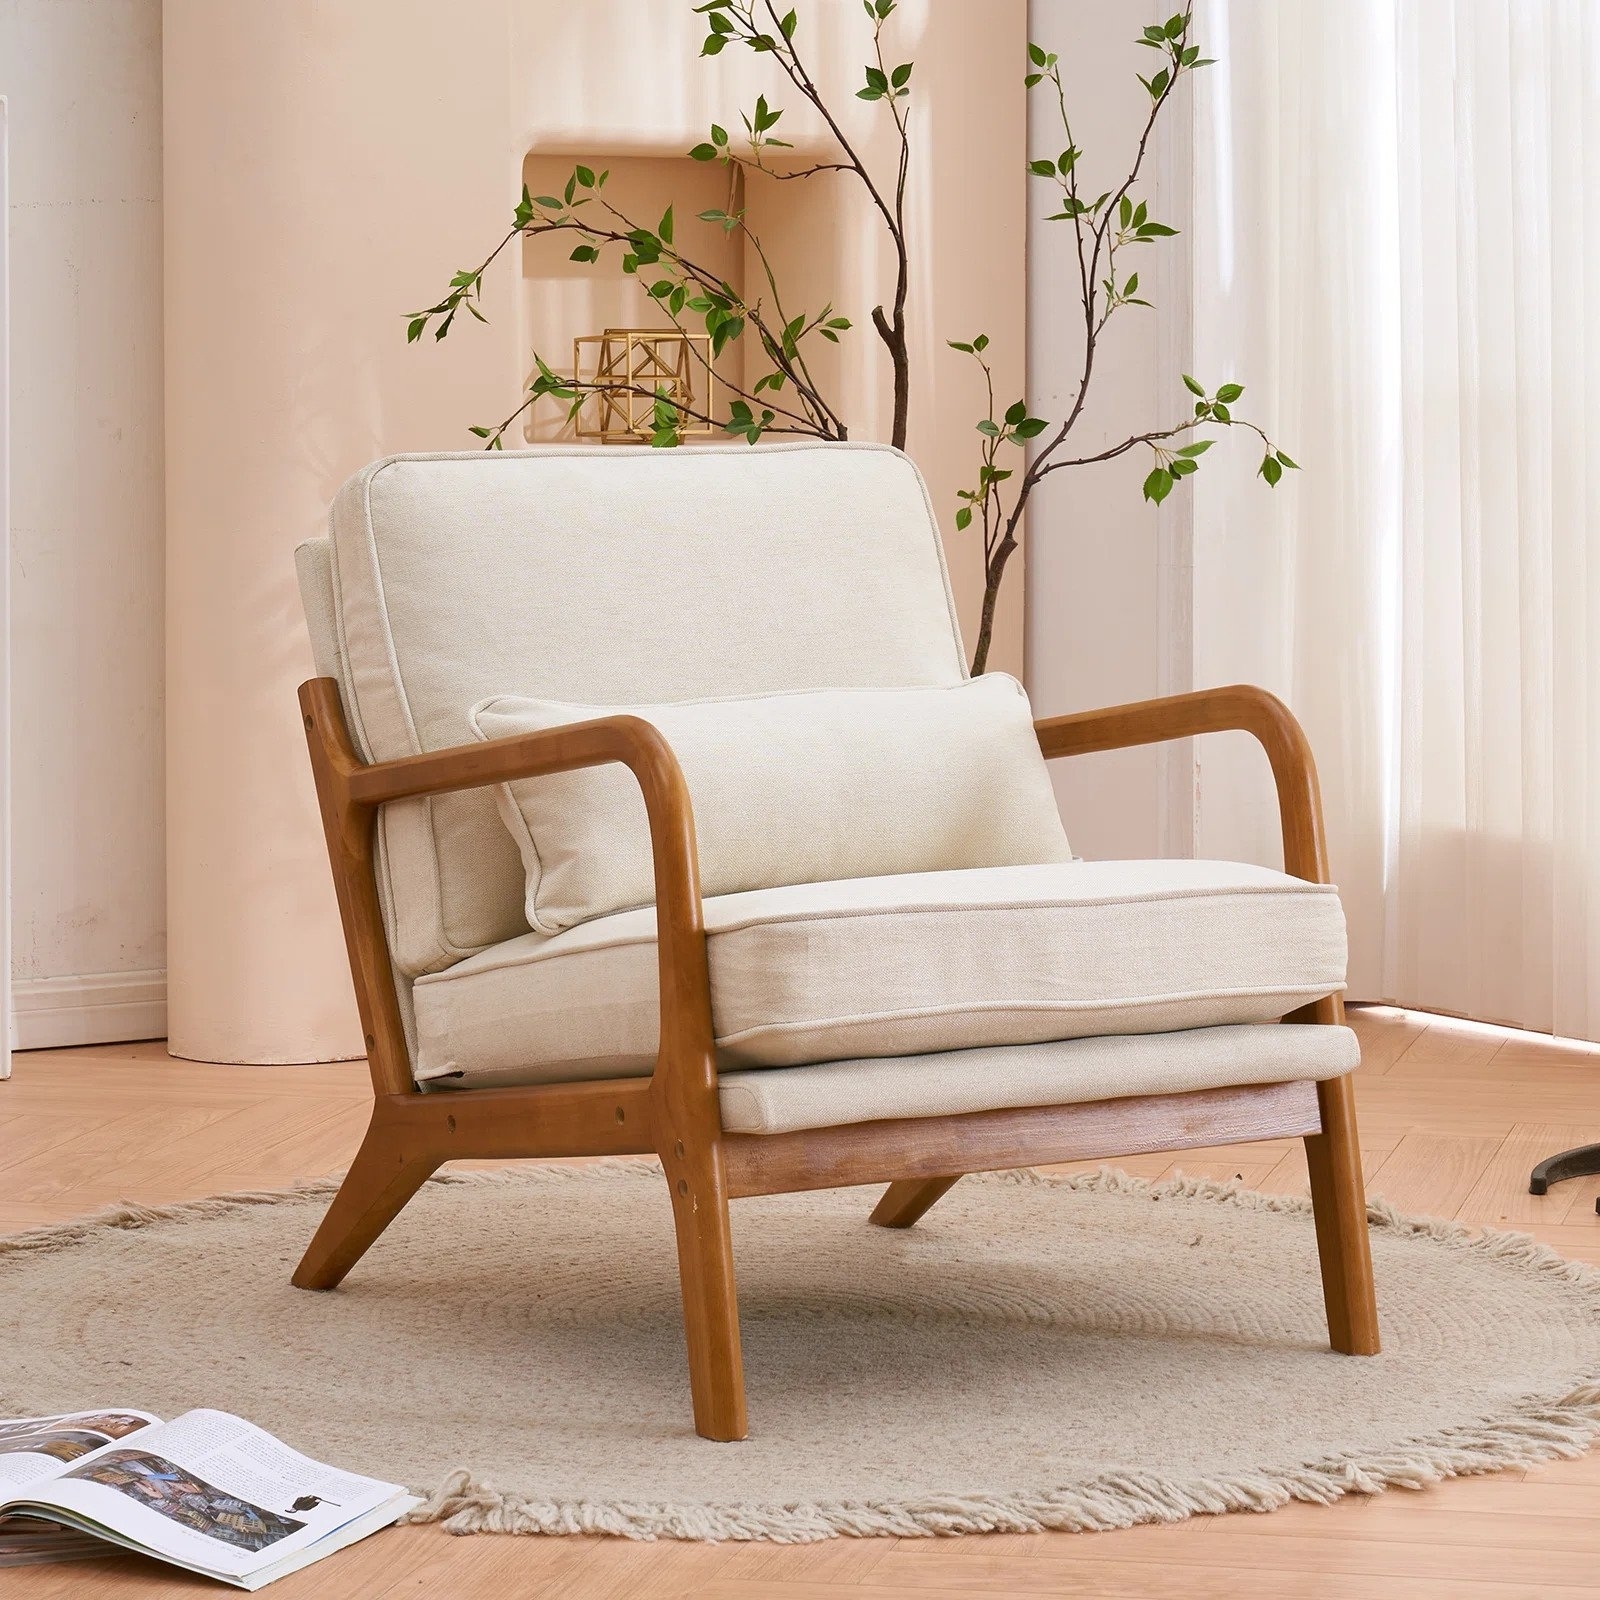 The chair with cream upholstery and natural wooden arms and legs